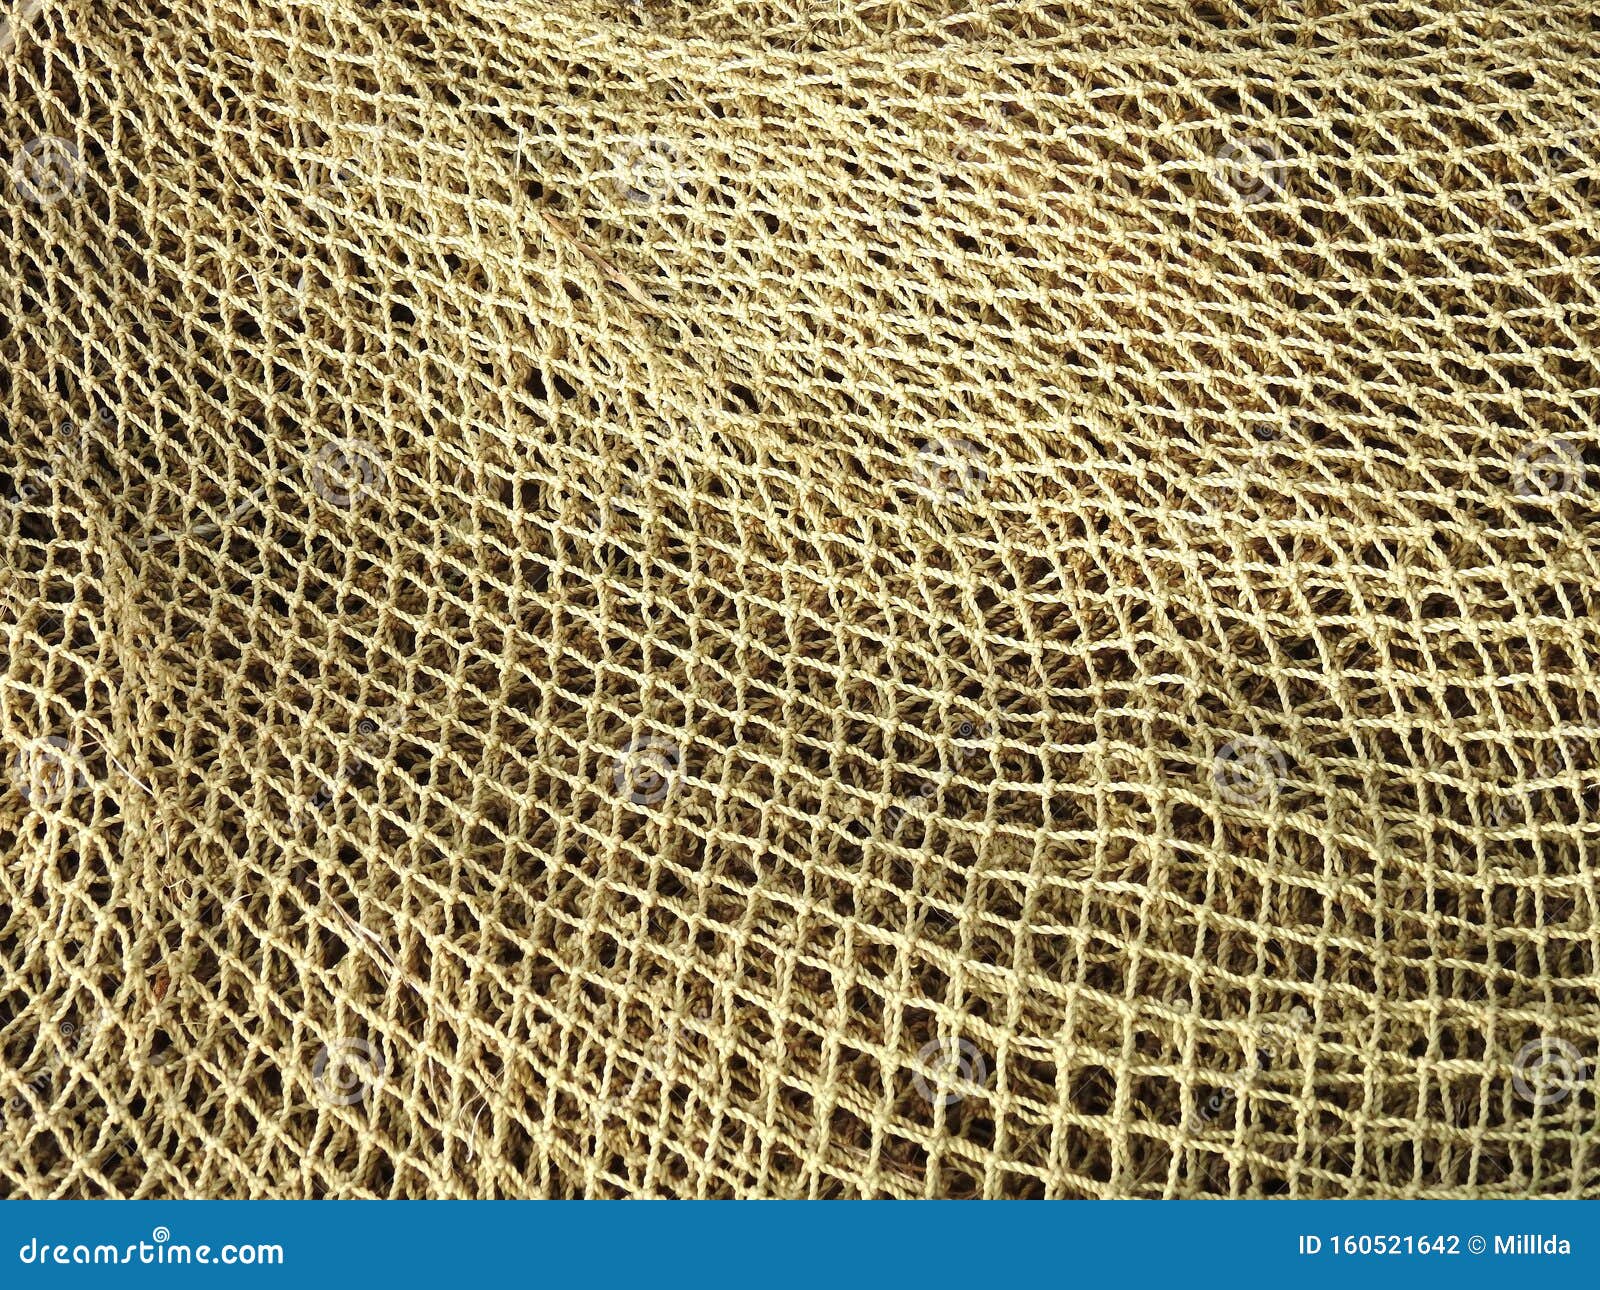 Fishing Net Texture, Lithuania Stock Photo - Image of brown, view